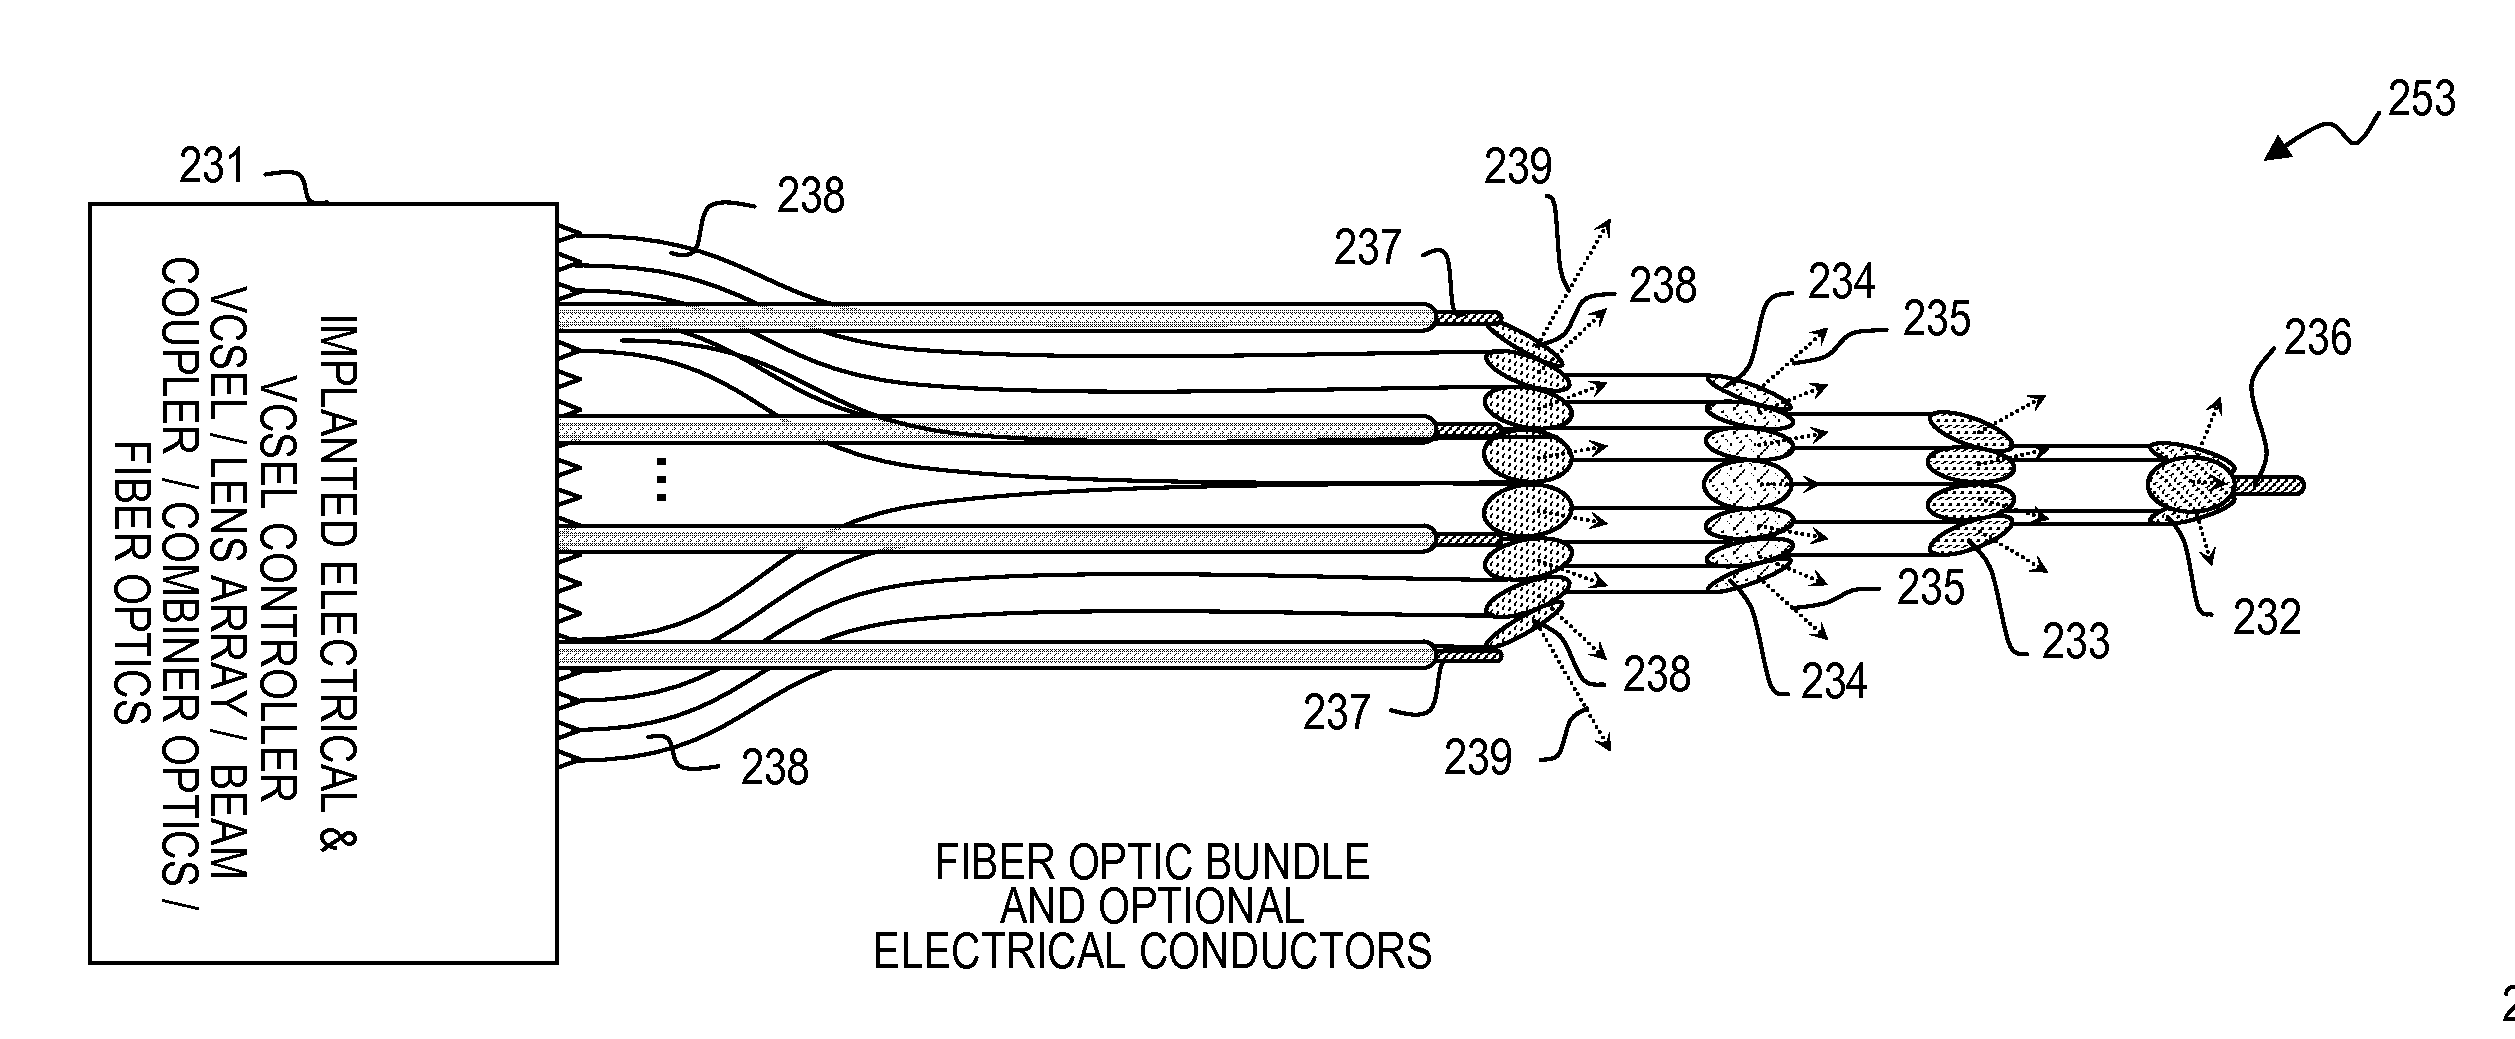 Implantable infrared nerve stimulation devices for peripheral and cranial nerve interfaces